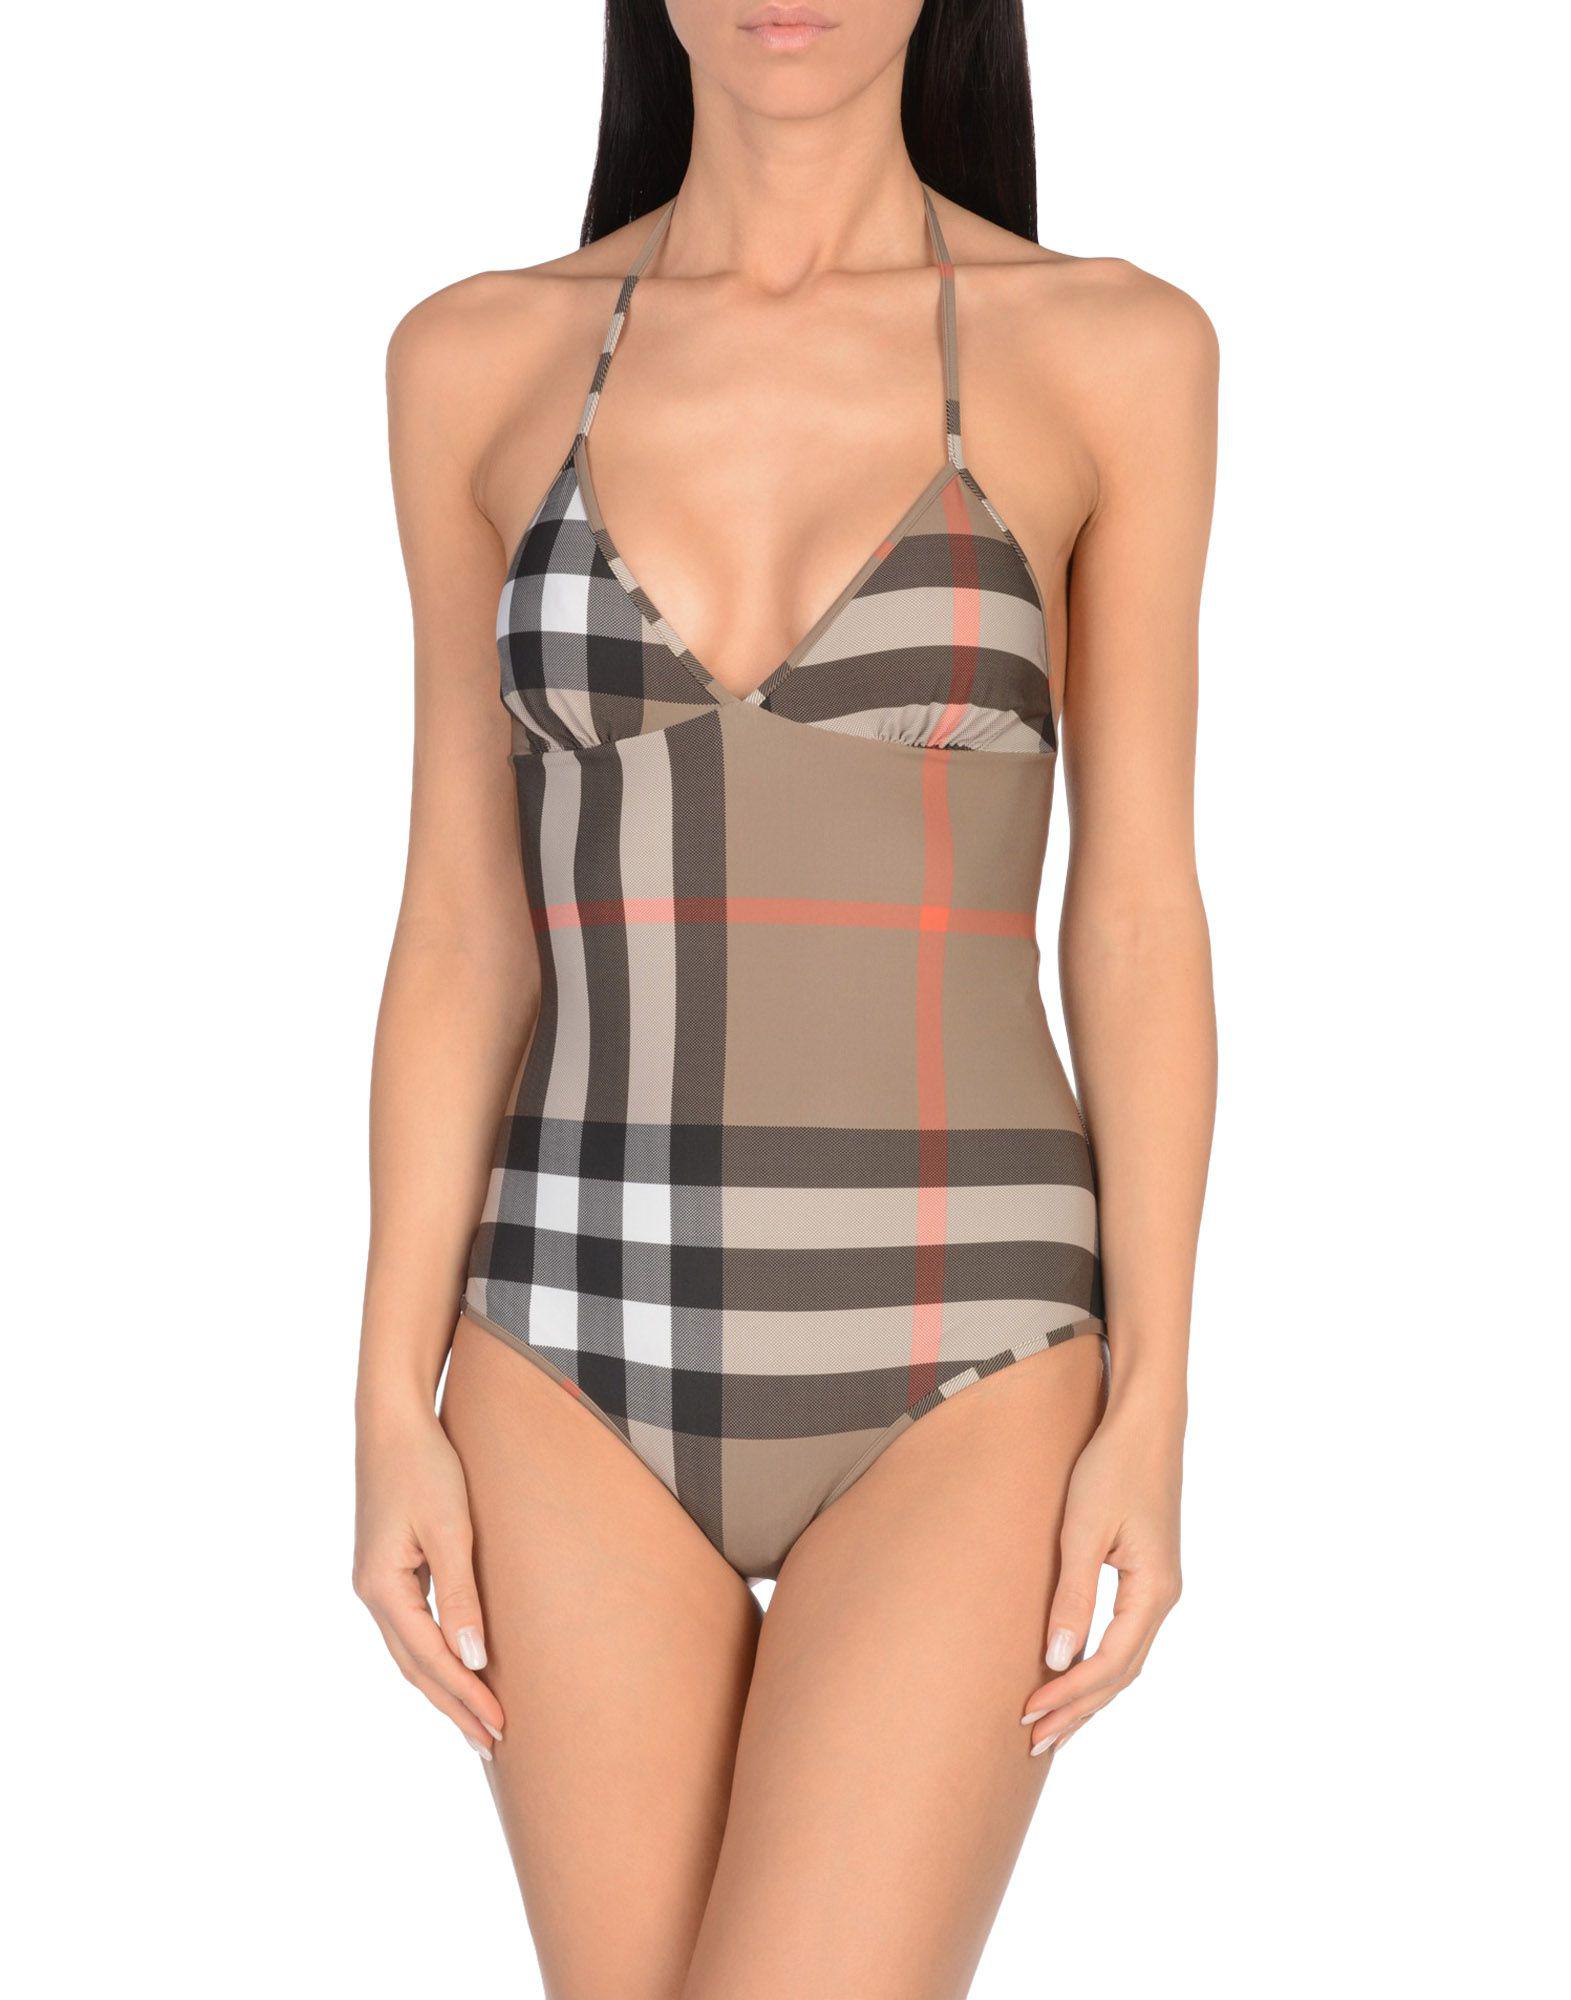 burberry swimwear one piece Online Shopping for Women, Men, Kids Fashion &  Lifestyle|Free Delivery & Returns! -